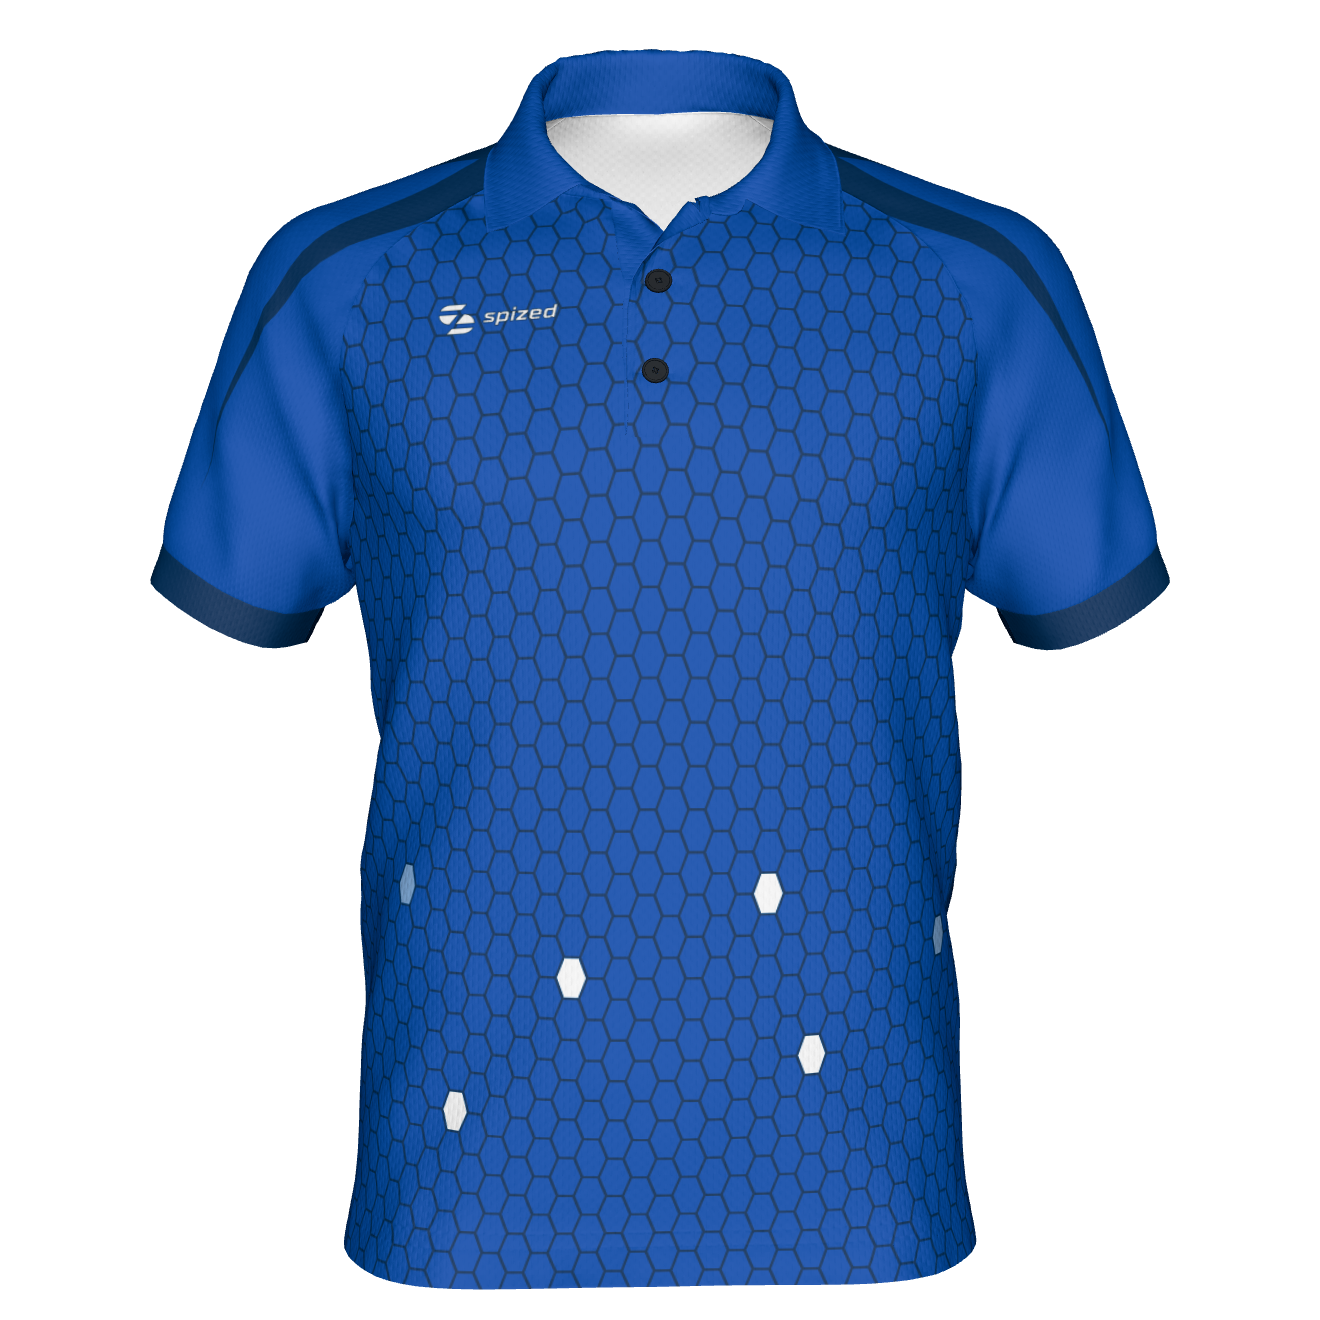 Darts Polo Men SPIZED_800, Dd's Discounts Careers And Apply Today